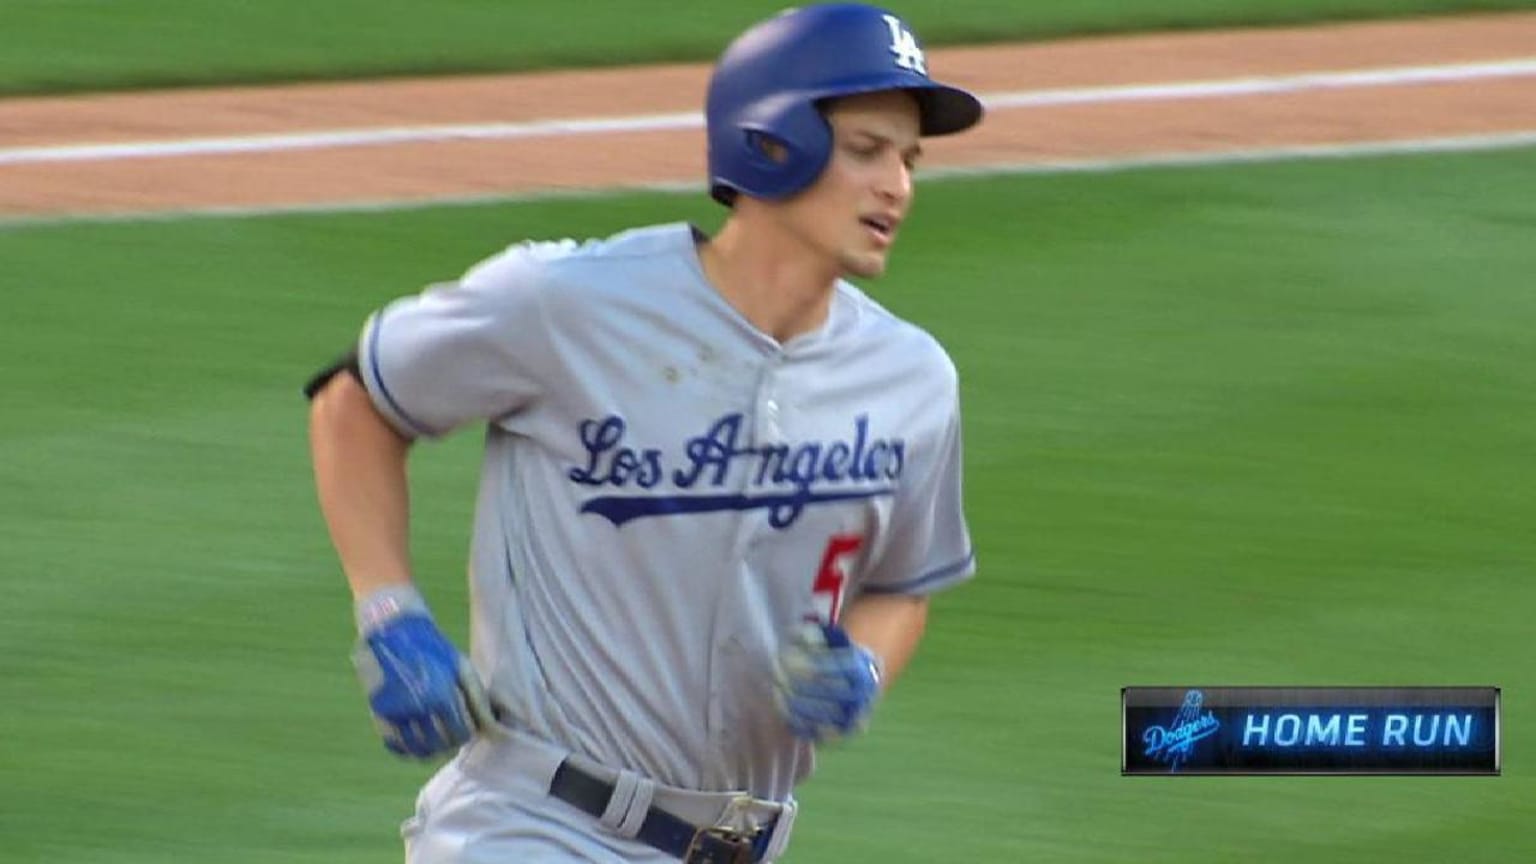 WS2017 Gm2: Seager smashes a go-ahead two-run homer in the 6th